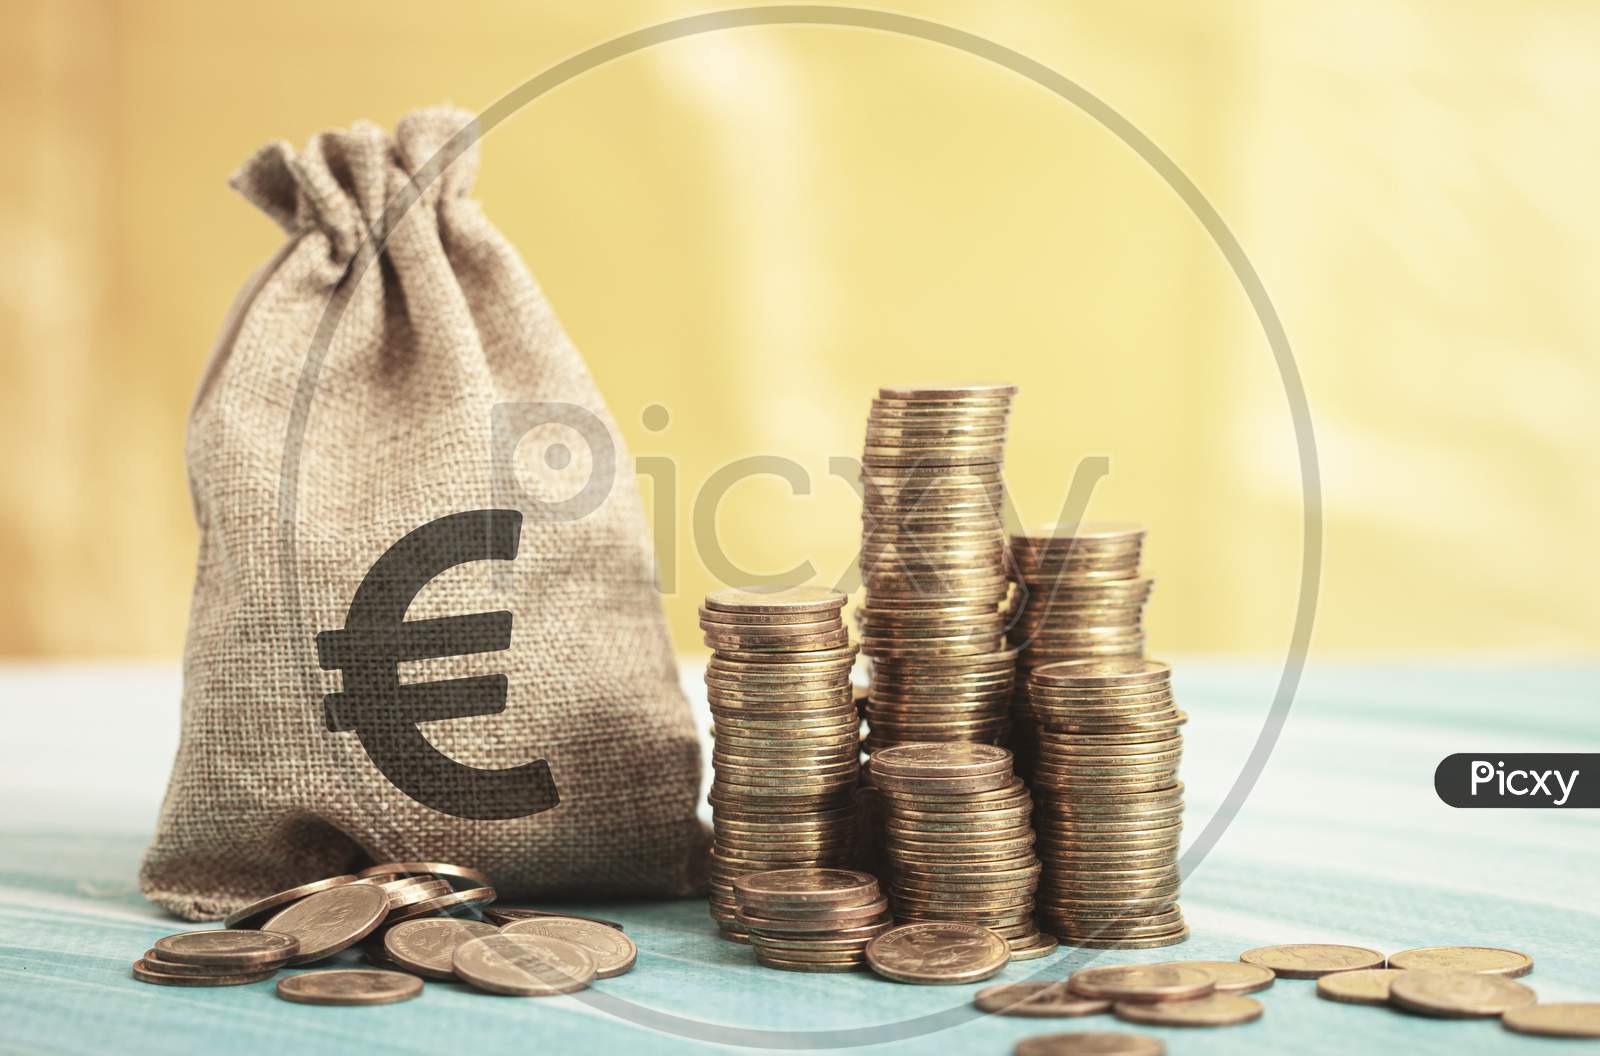 Euro Money Bag With Coins On The Floor